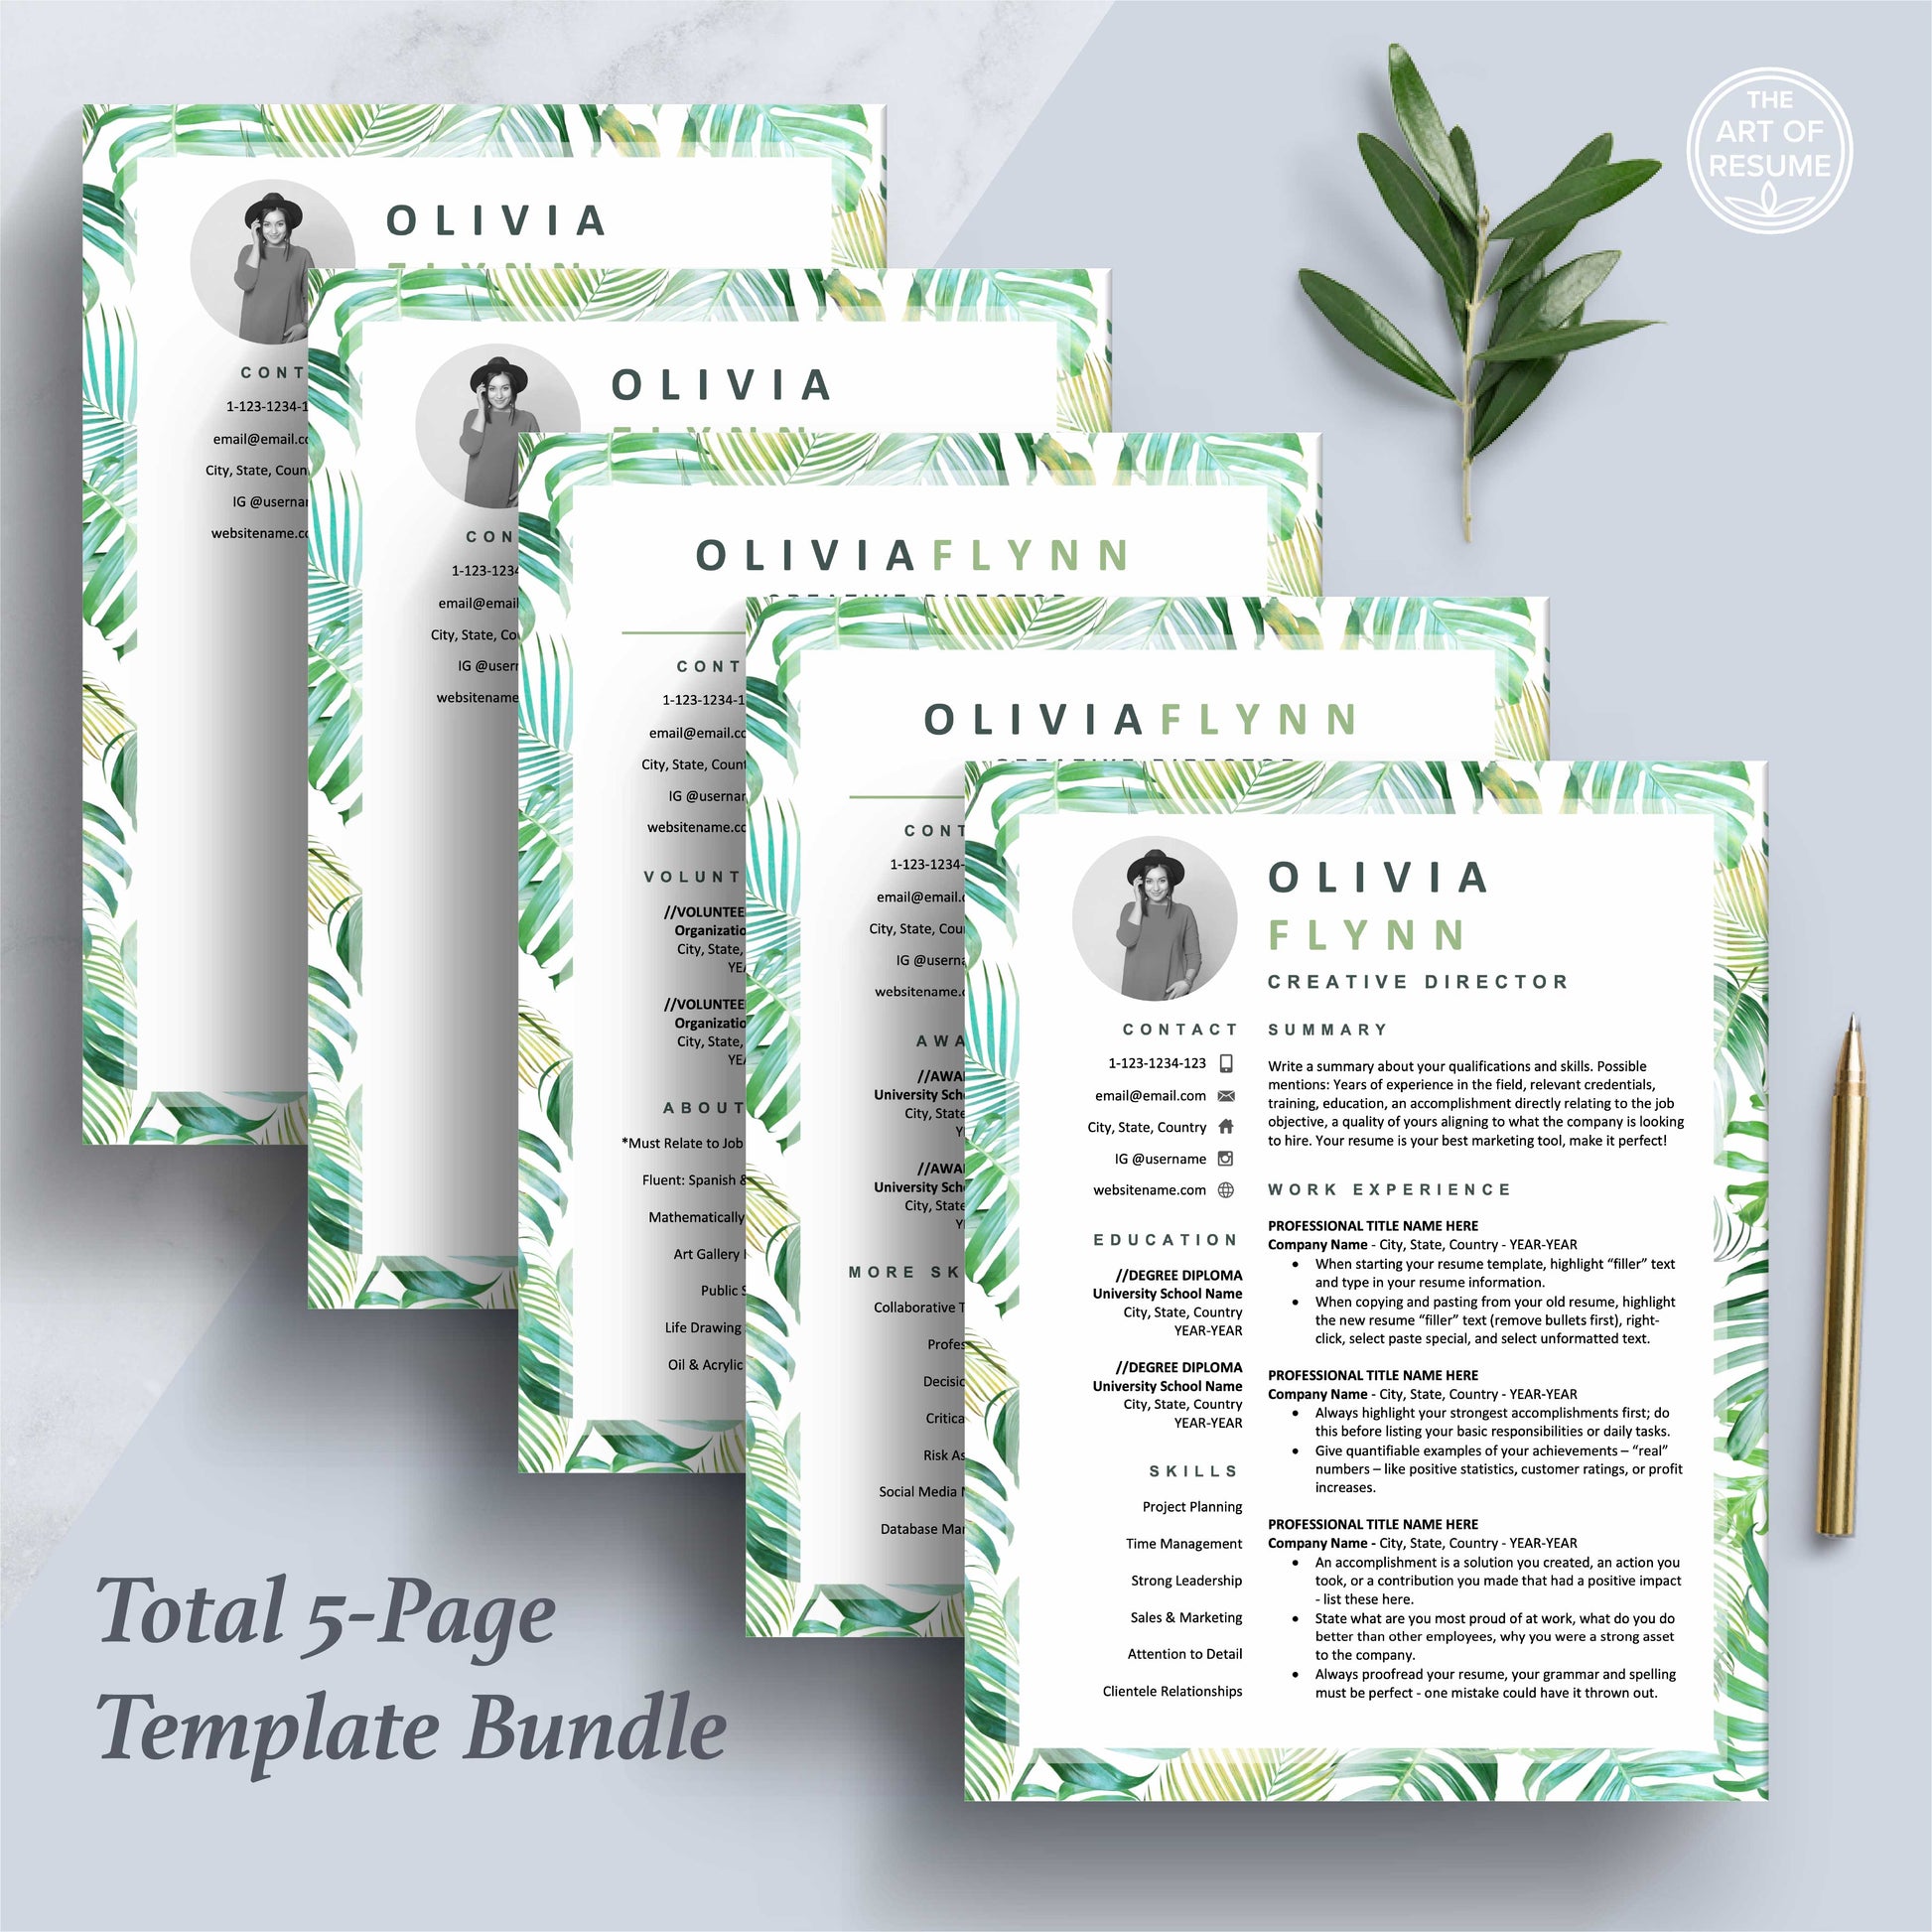 The Art of Resume Templates | Creative Tropical Green  Resume CV Design Bundle including matching cover letter and reference page